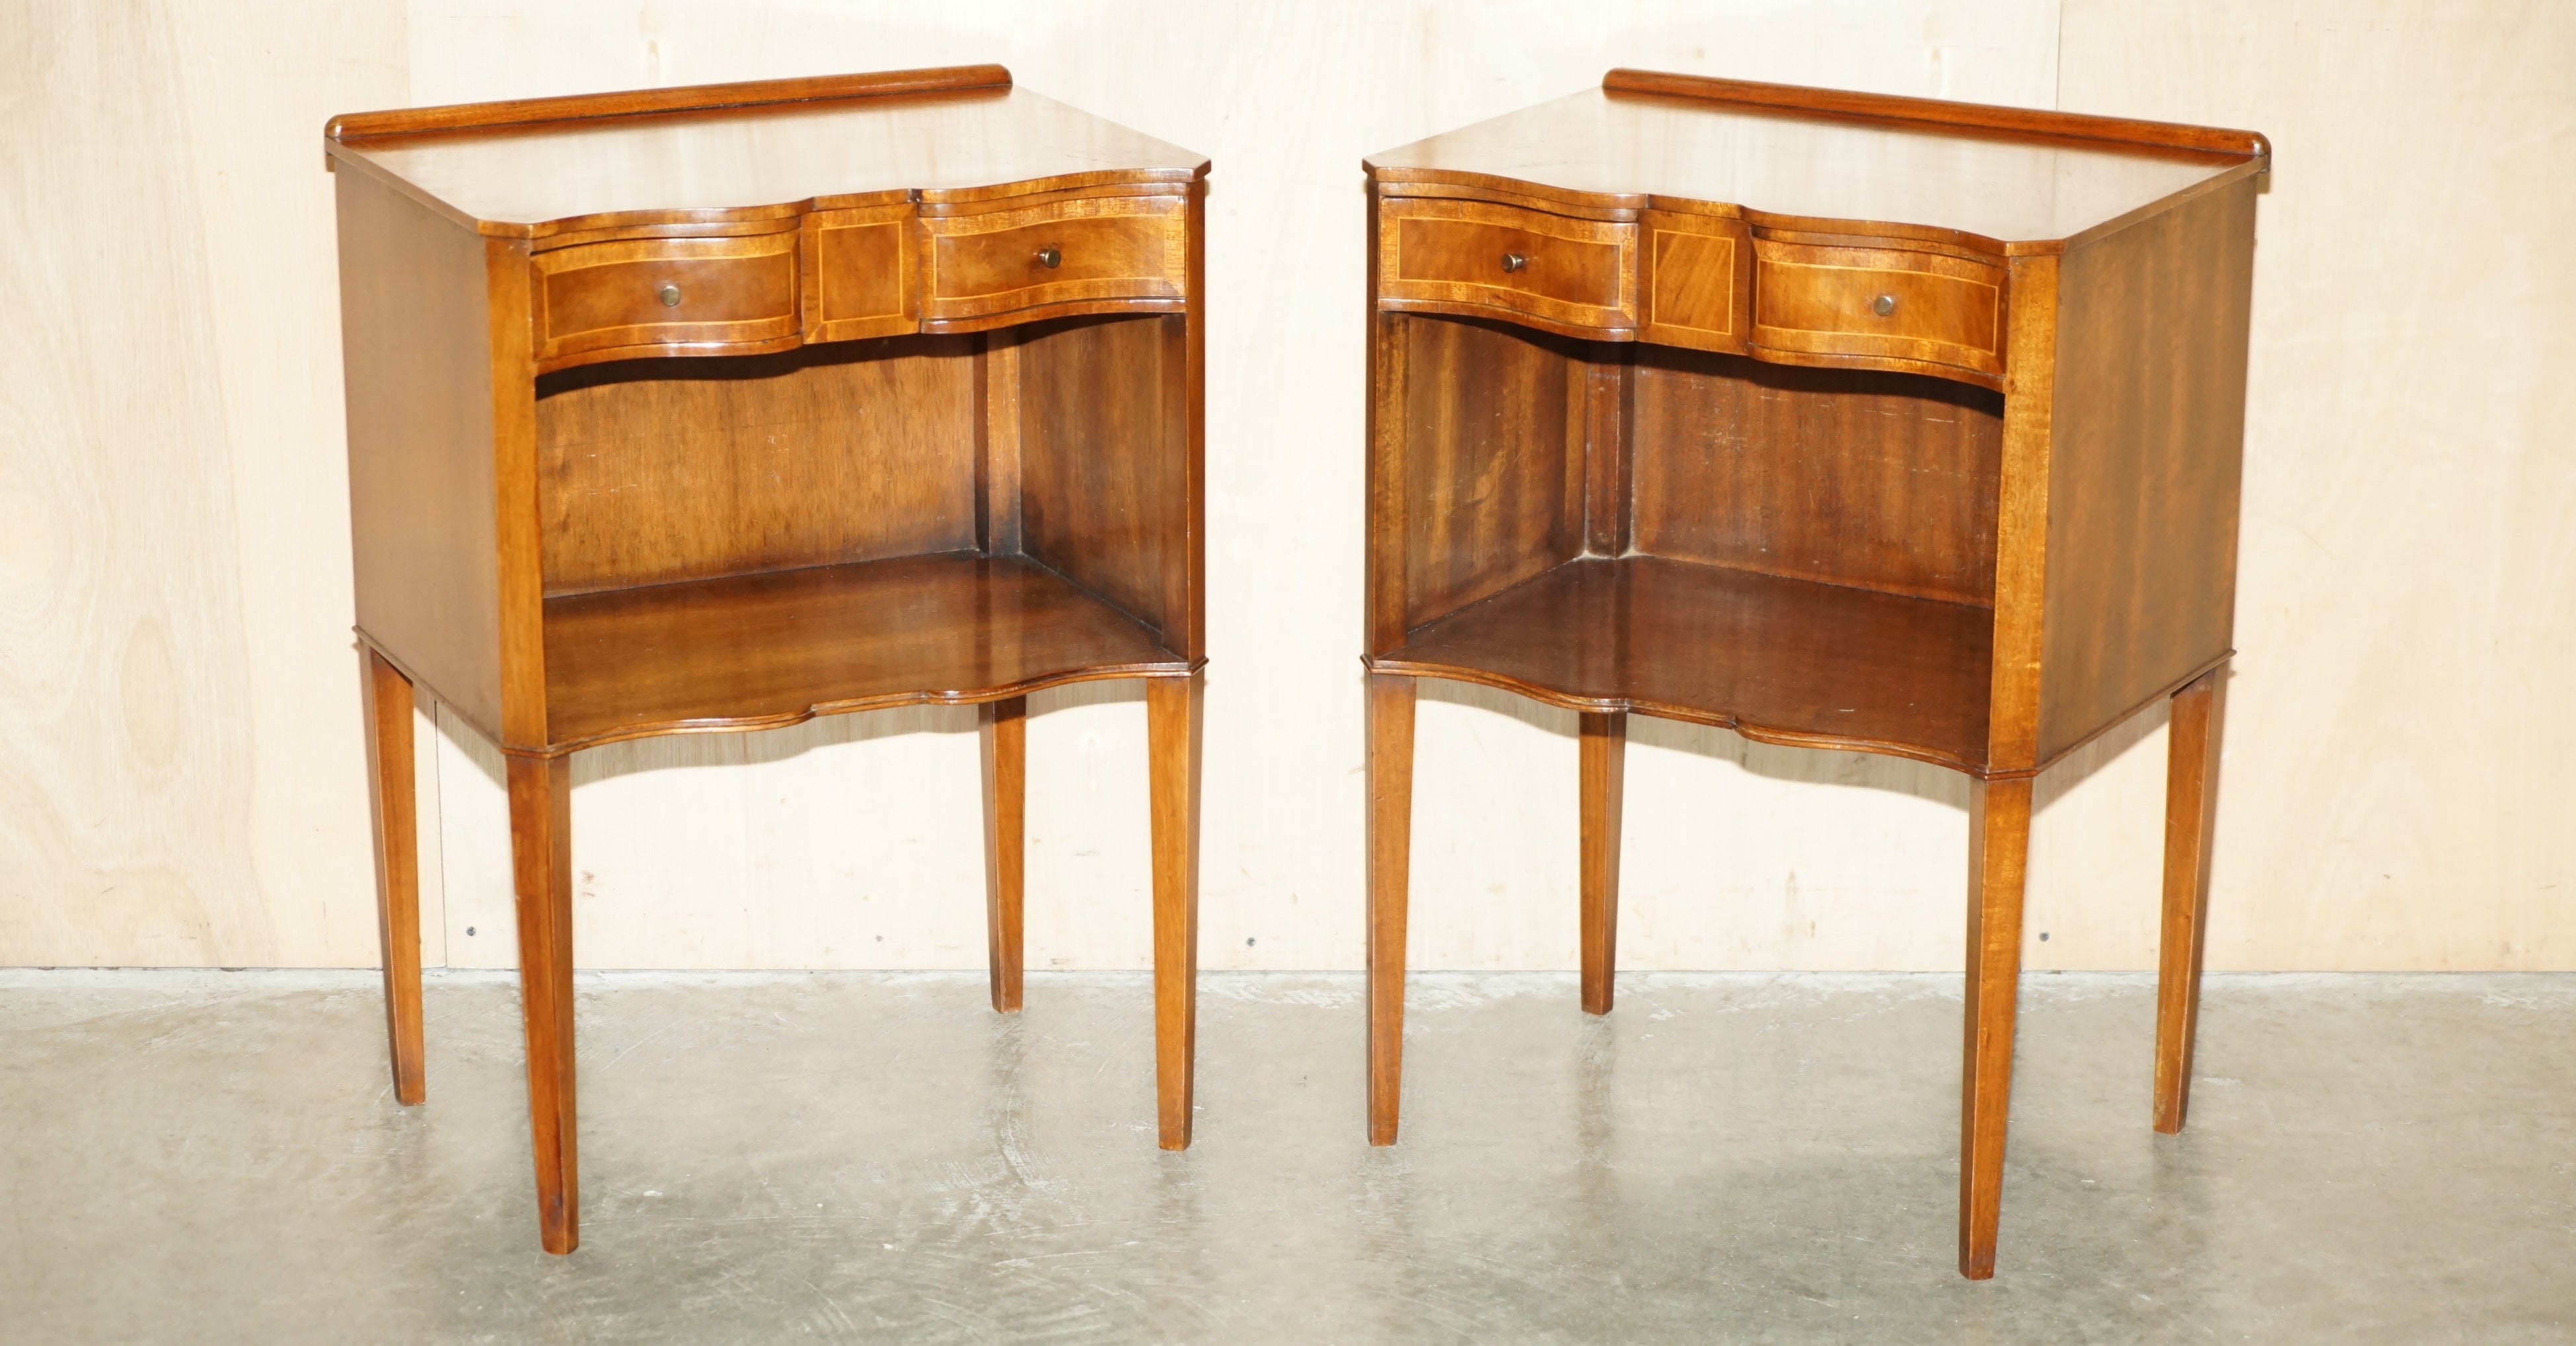 Royal House Antiques

Royal House Antiques is delighted to offer for sale this absolutely exquisite pair of fully restored, Flamed Mahogany, Serpentine fronted bedside or side tables

Please note the delivery fee listed is just a guide, it covers